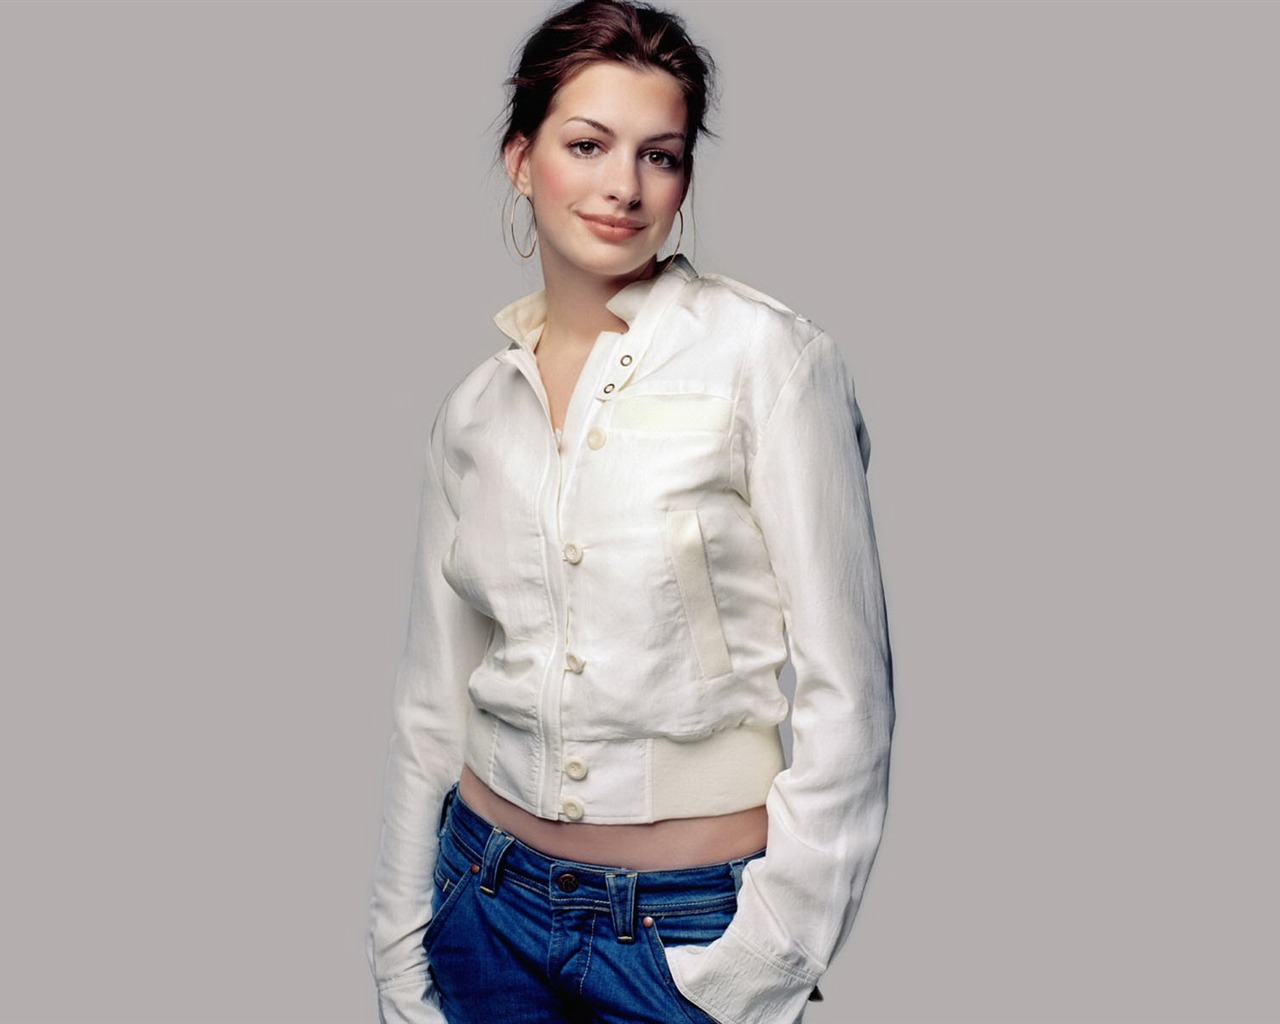 Anne Hathaway #015 - 1280x1024 Wallpapers Pictures Photos Images